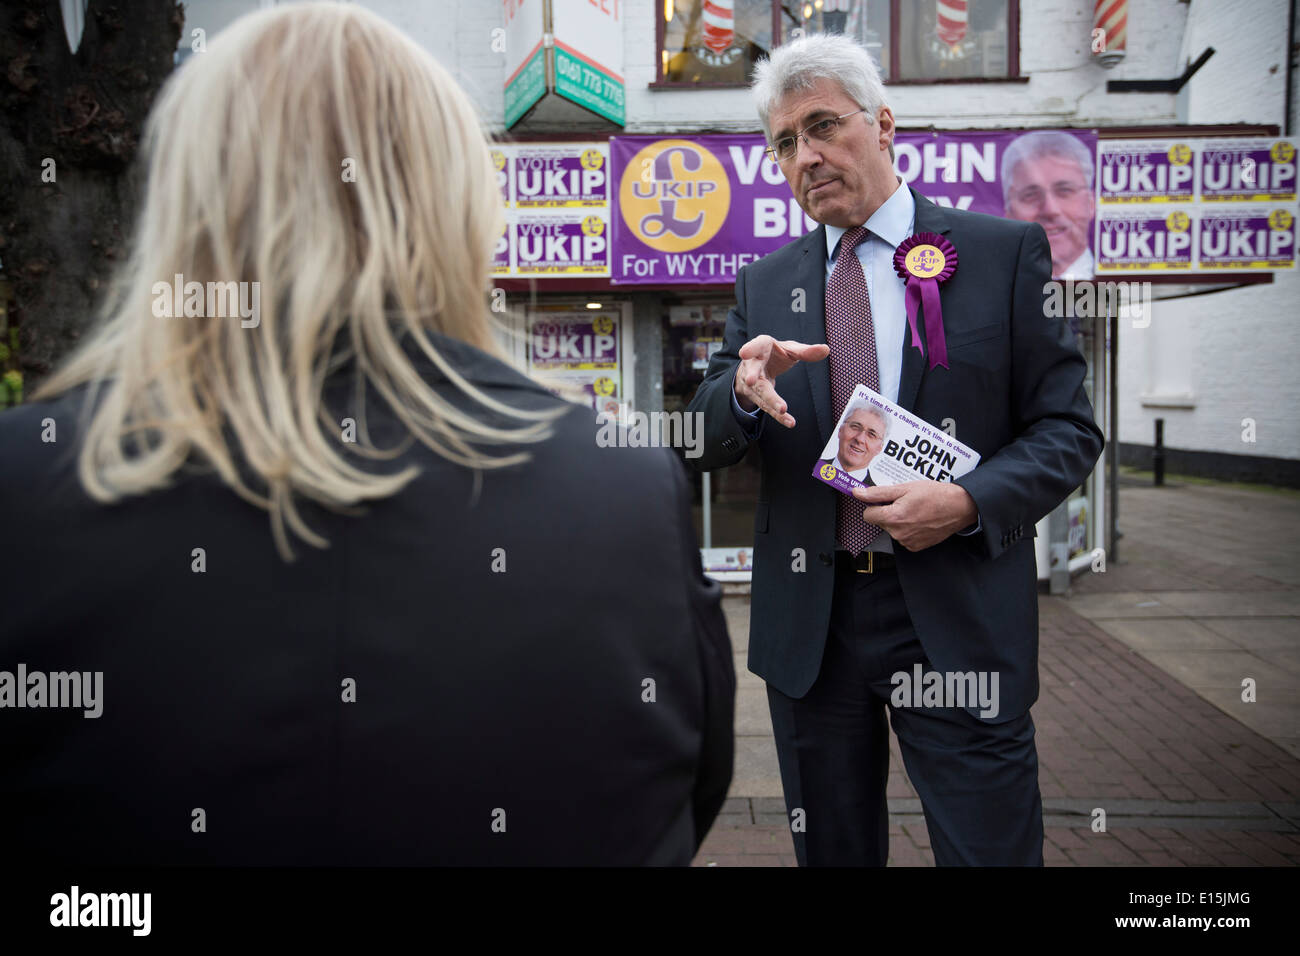 John Bickley, the UKIP candidate in the Wythenshawe and Sale East by-election, handing out leaflets in Sale, Cheshire. Stock Photo